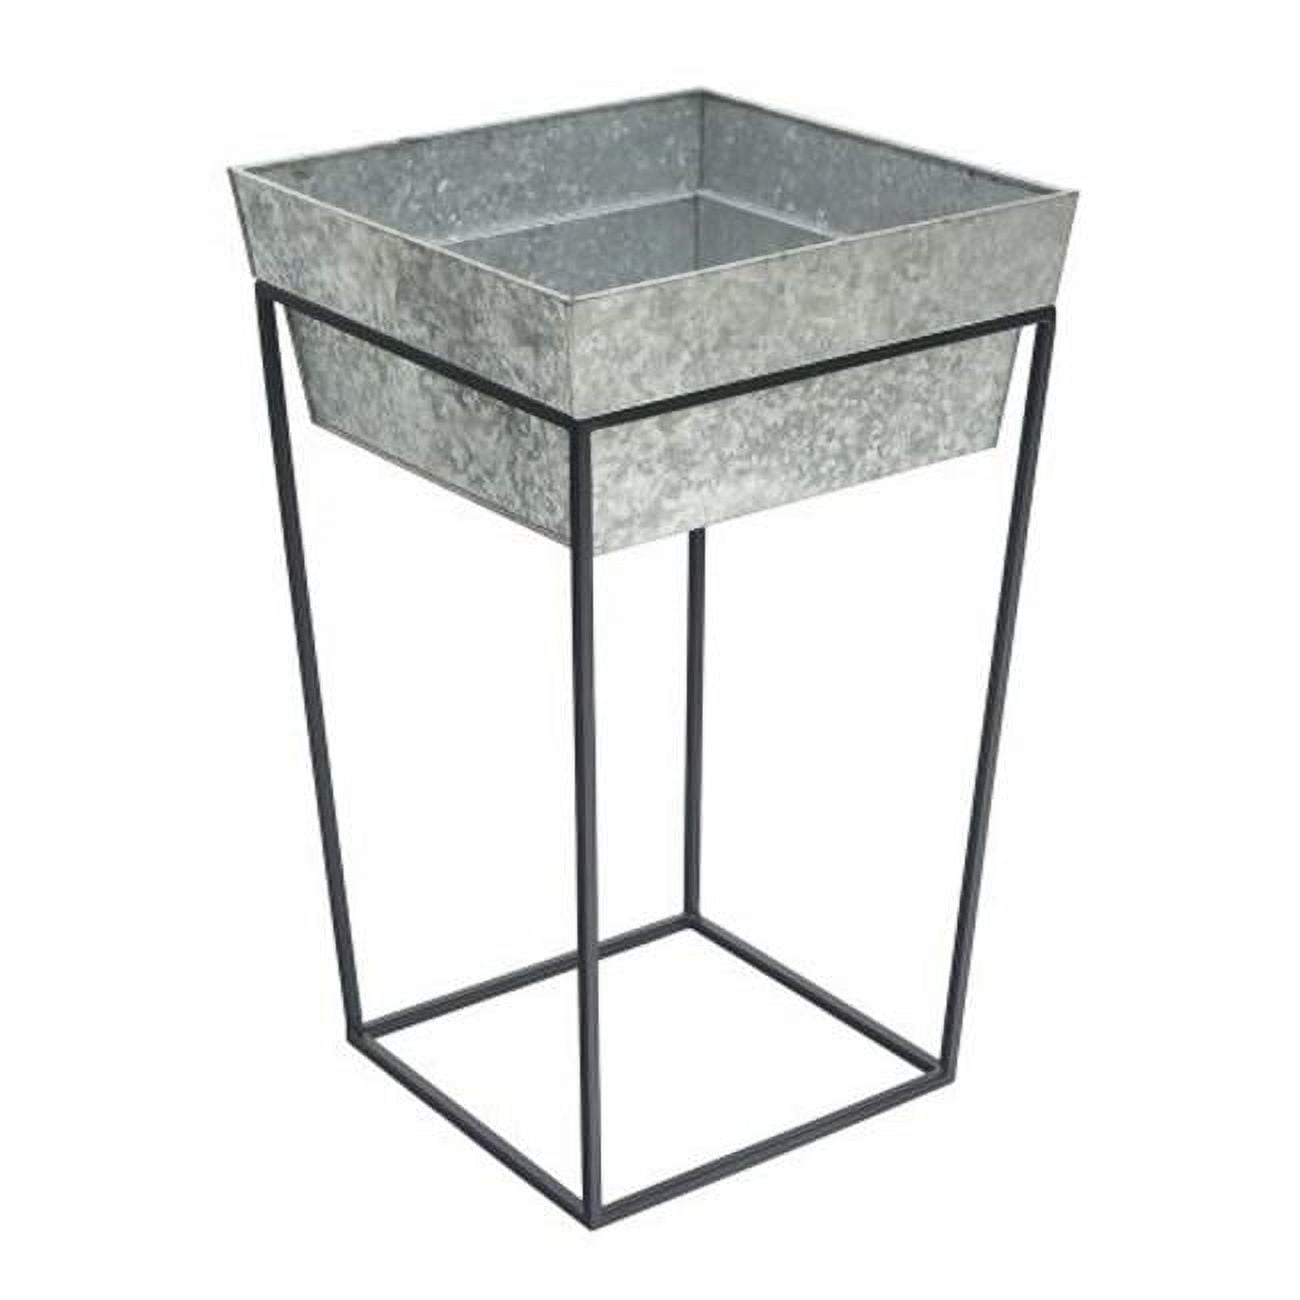 Achla Fb-46g7 Arne Stand With Deep Galvanized Tray, Tall